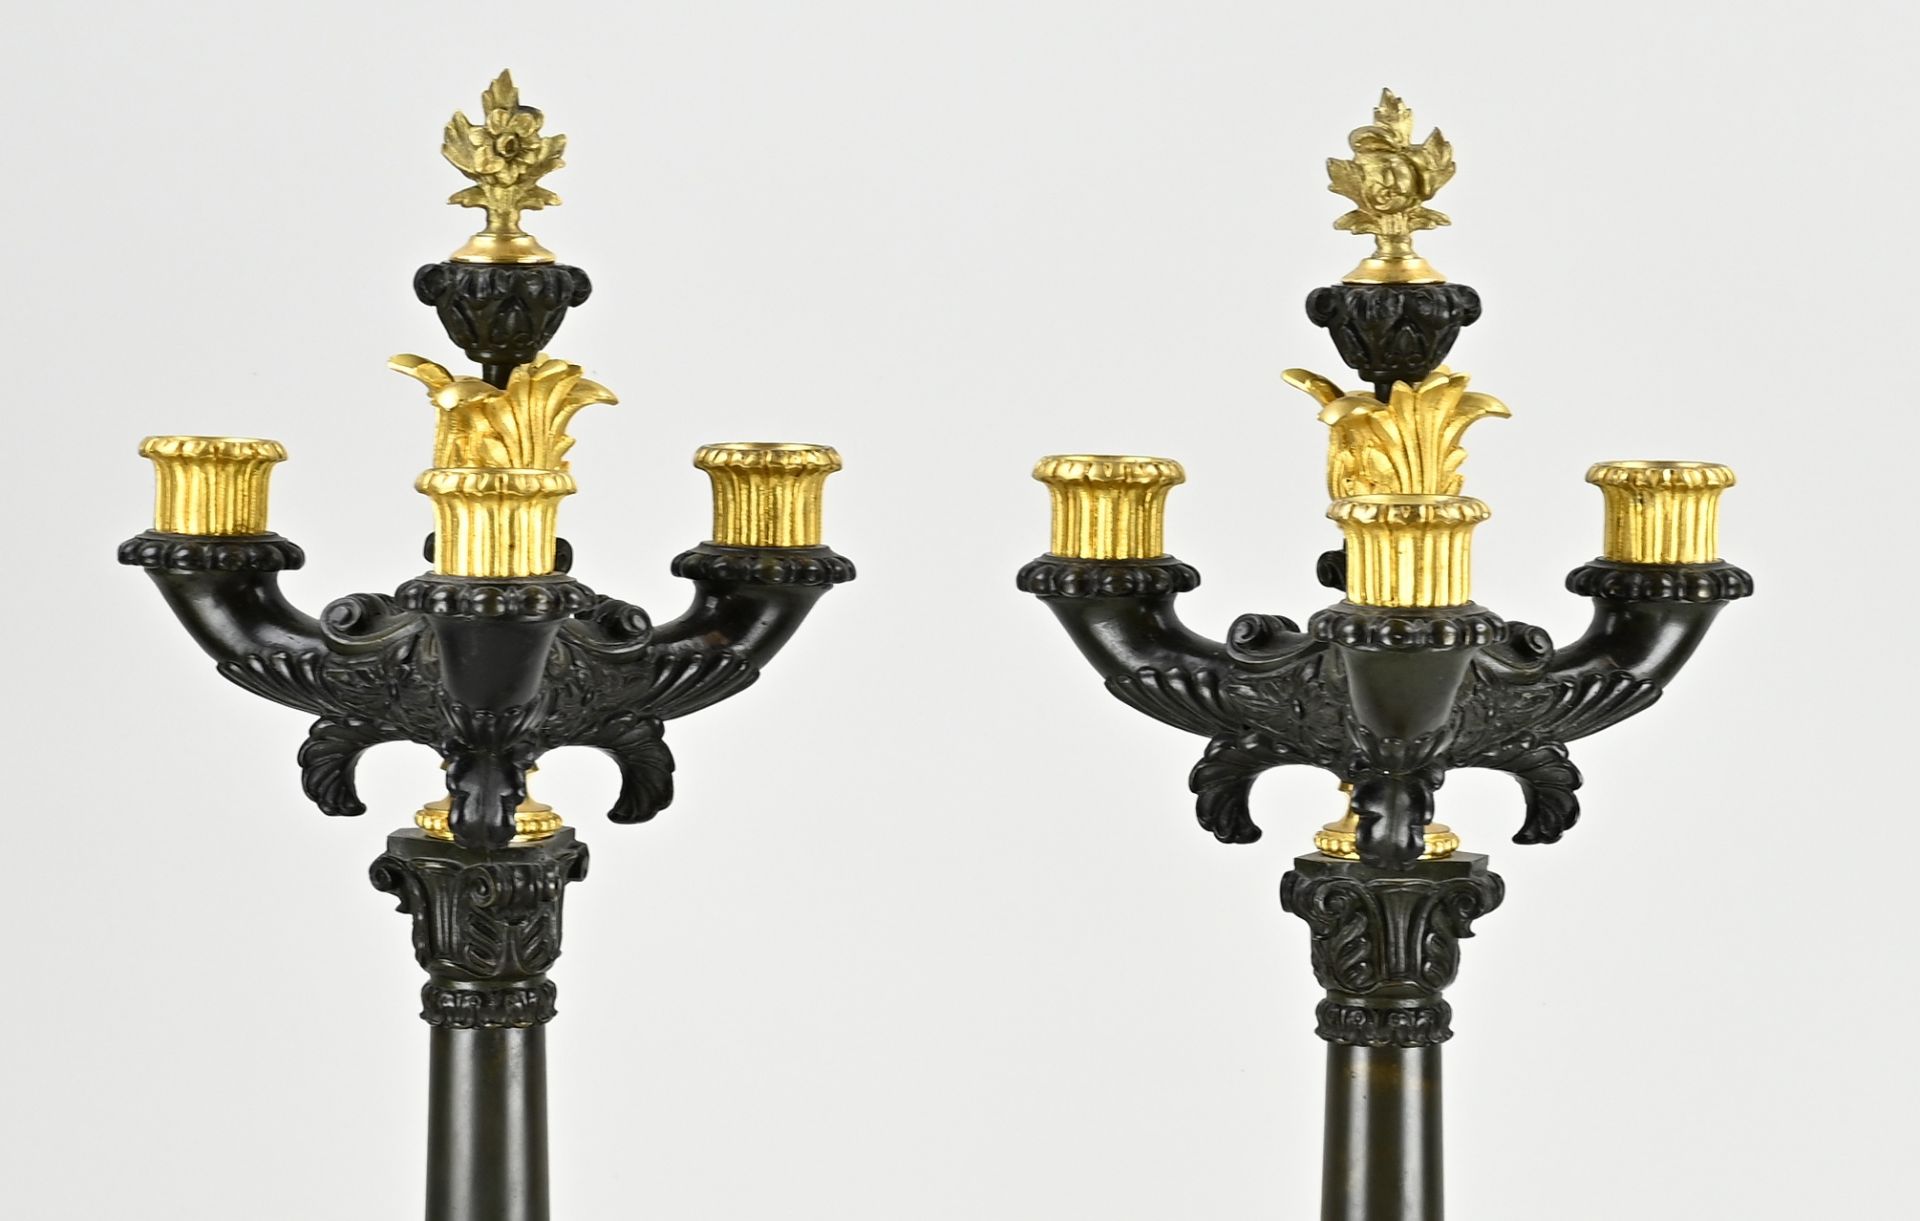 Two antique Charles Dix candlesticks, 1840 - Image 2 of 3